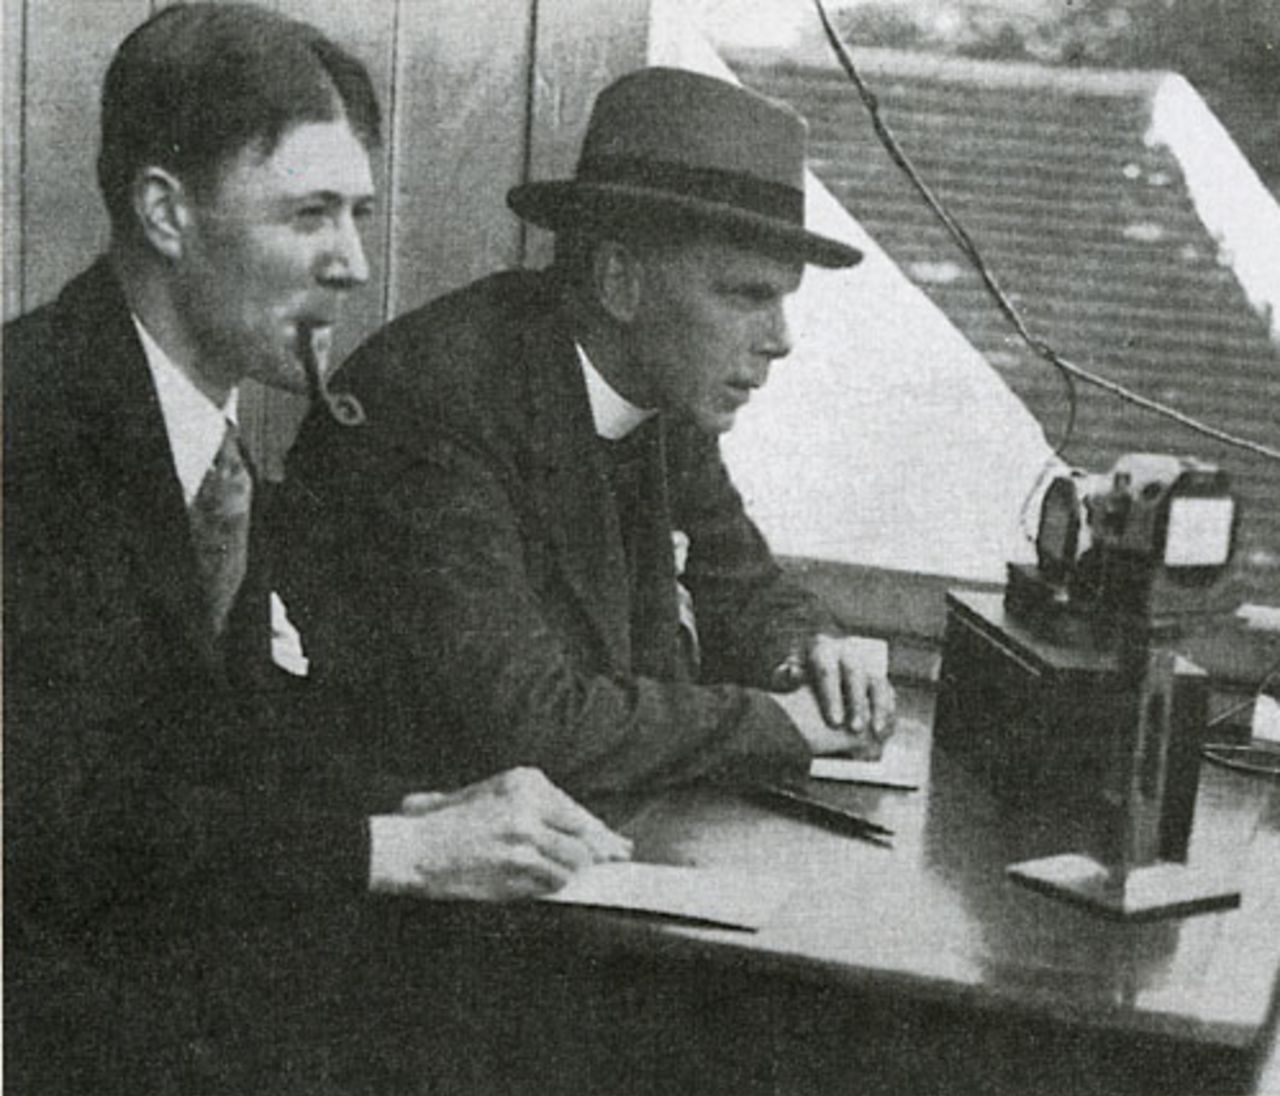 Frank Gillingham (right) broadcasting for the BBC in 1927. Gillingham gave the BBC's first live commentary on cricket during the Essex v New Zealanders match at Leyton in May 1927